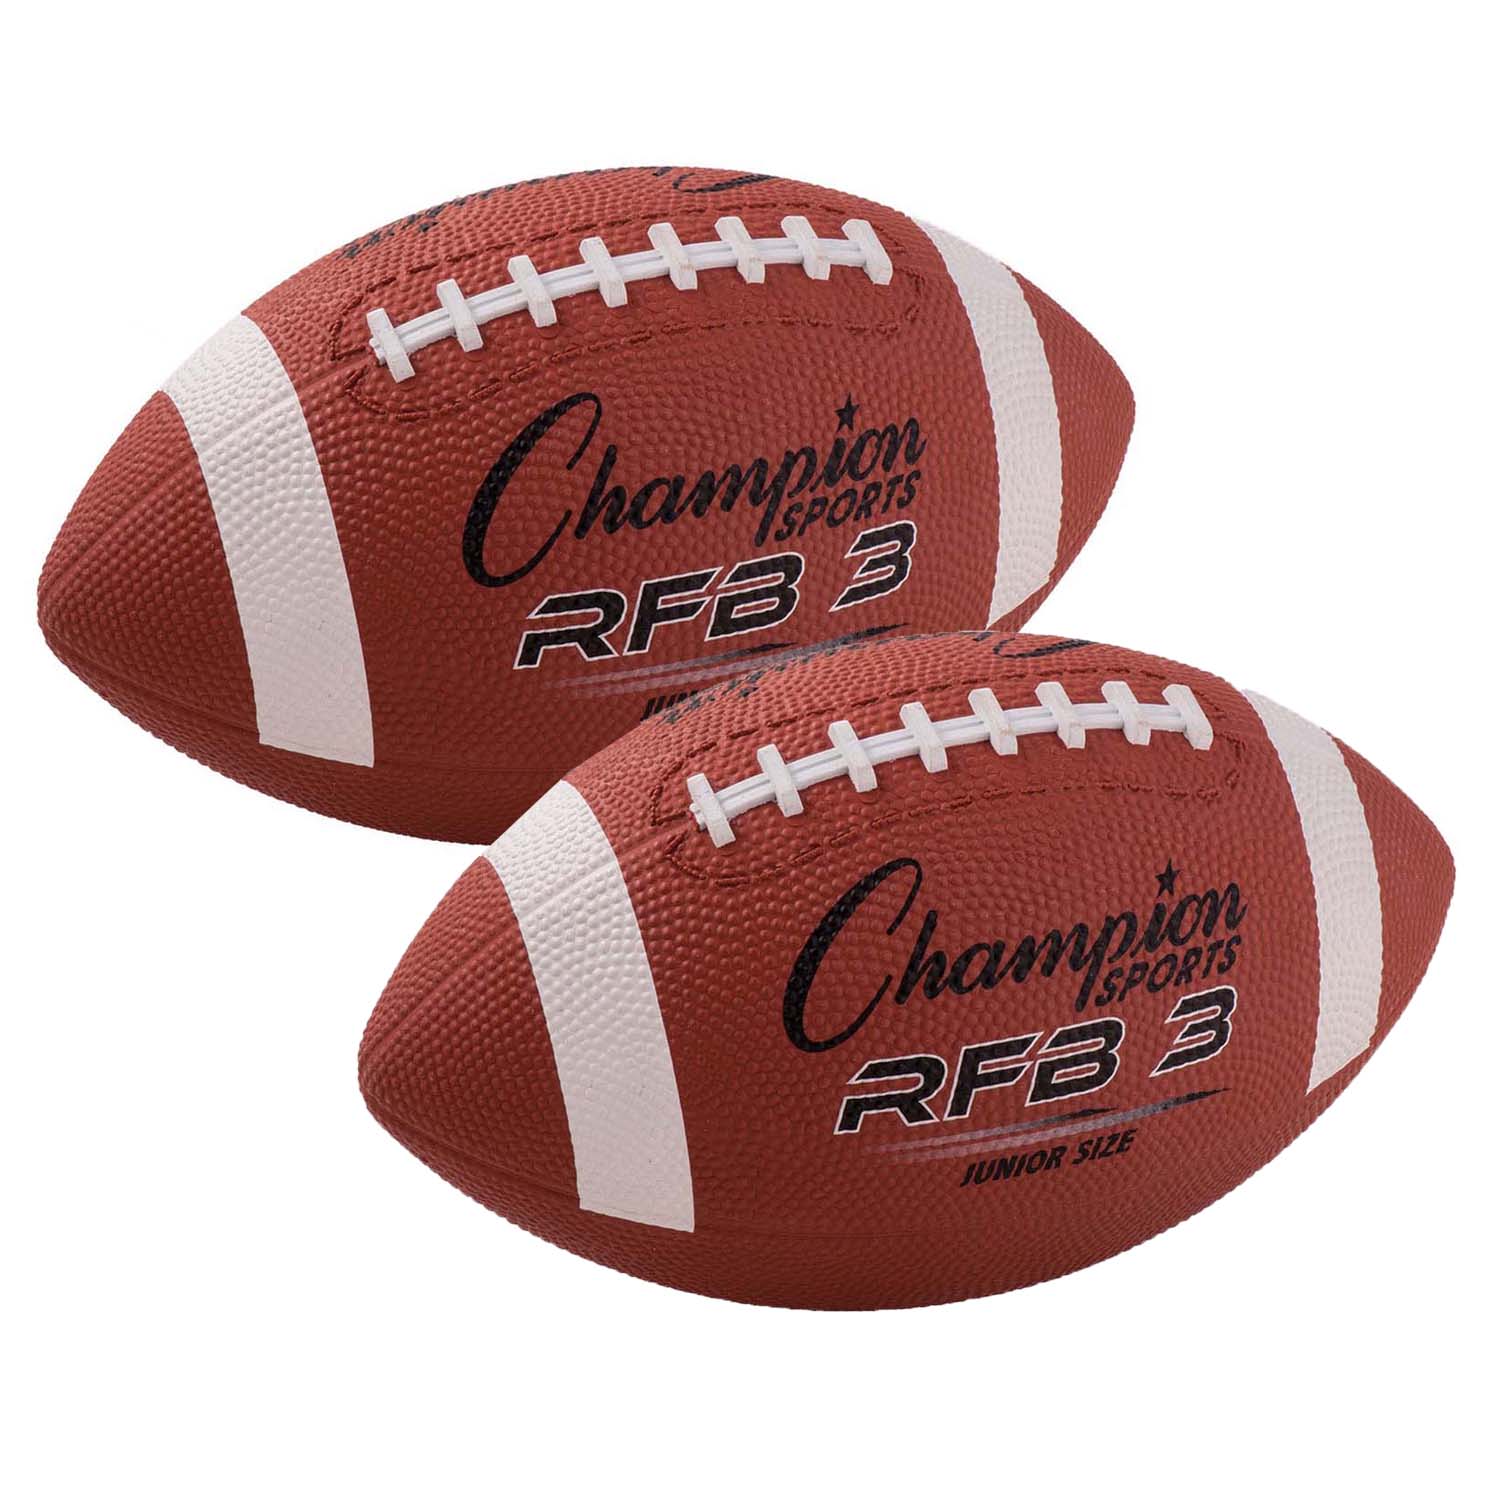 Rubber Football, Junior Size, Pack of 2